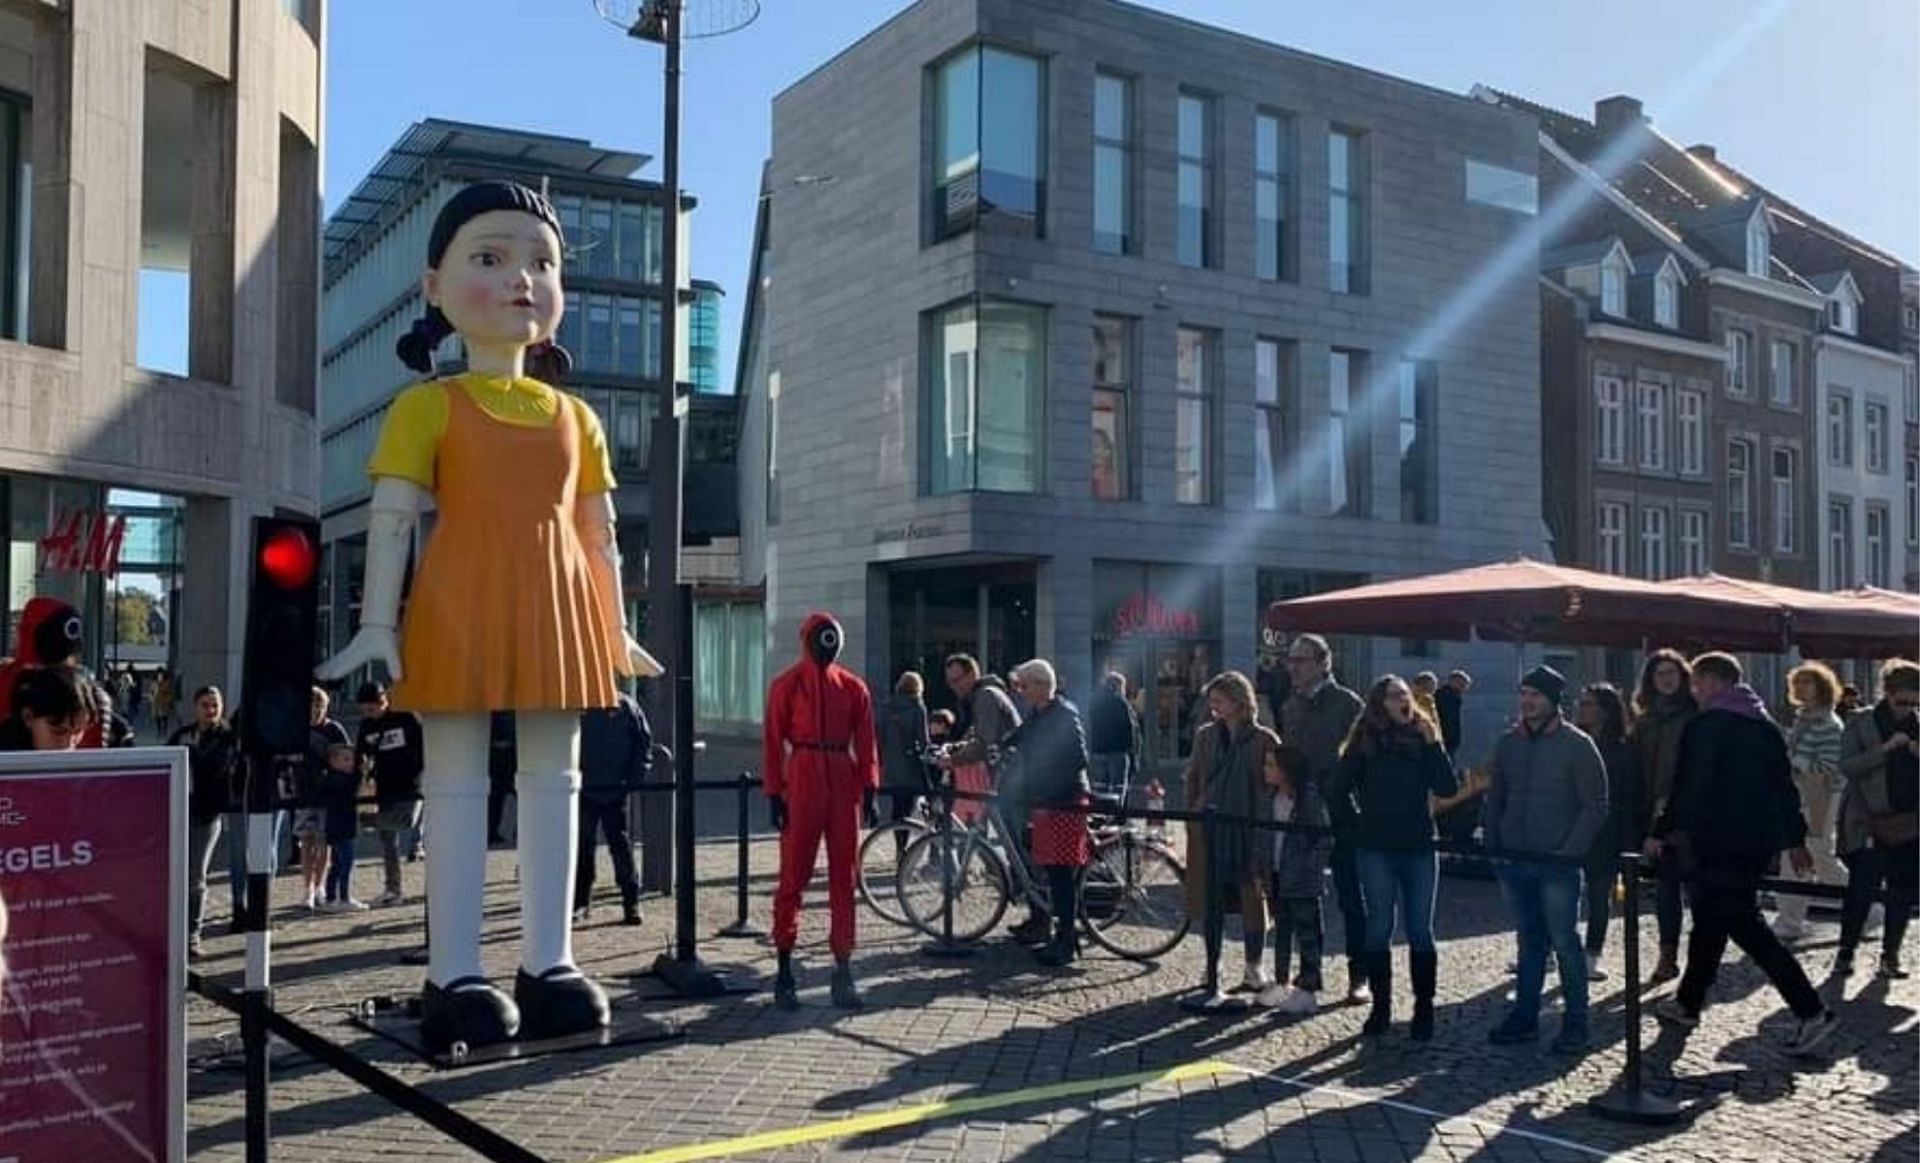 Real-life Squid Game play day held in the Netherlands (Image via Twitter/@LikeToBeBossy)